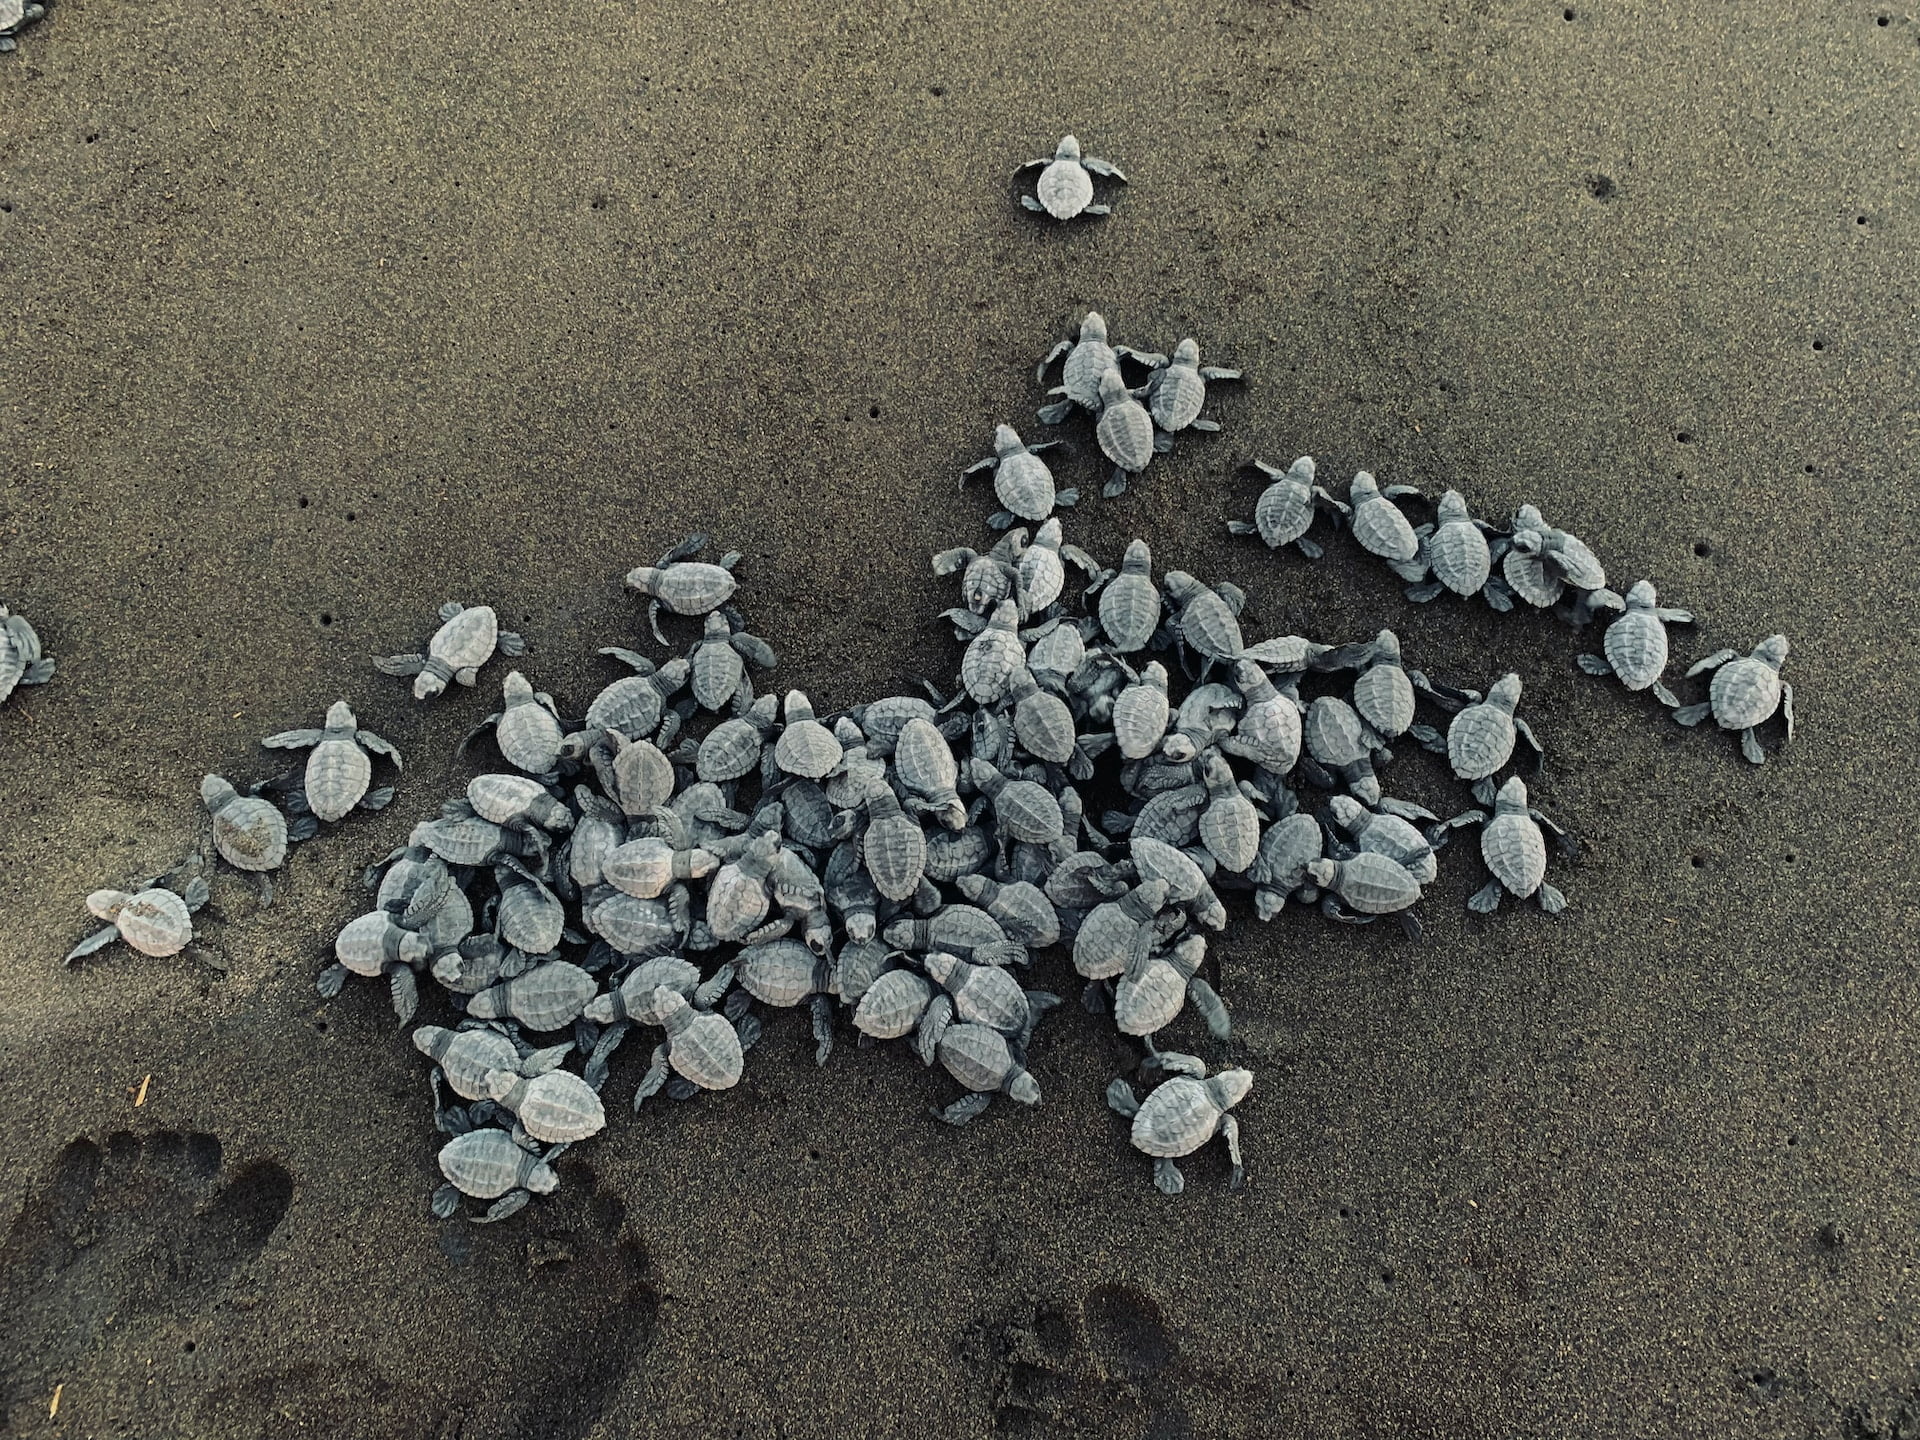 Record Number Of Olive Ridley Turtle Eggs Found In Bangladesh.